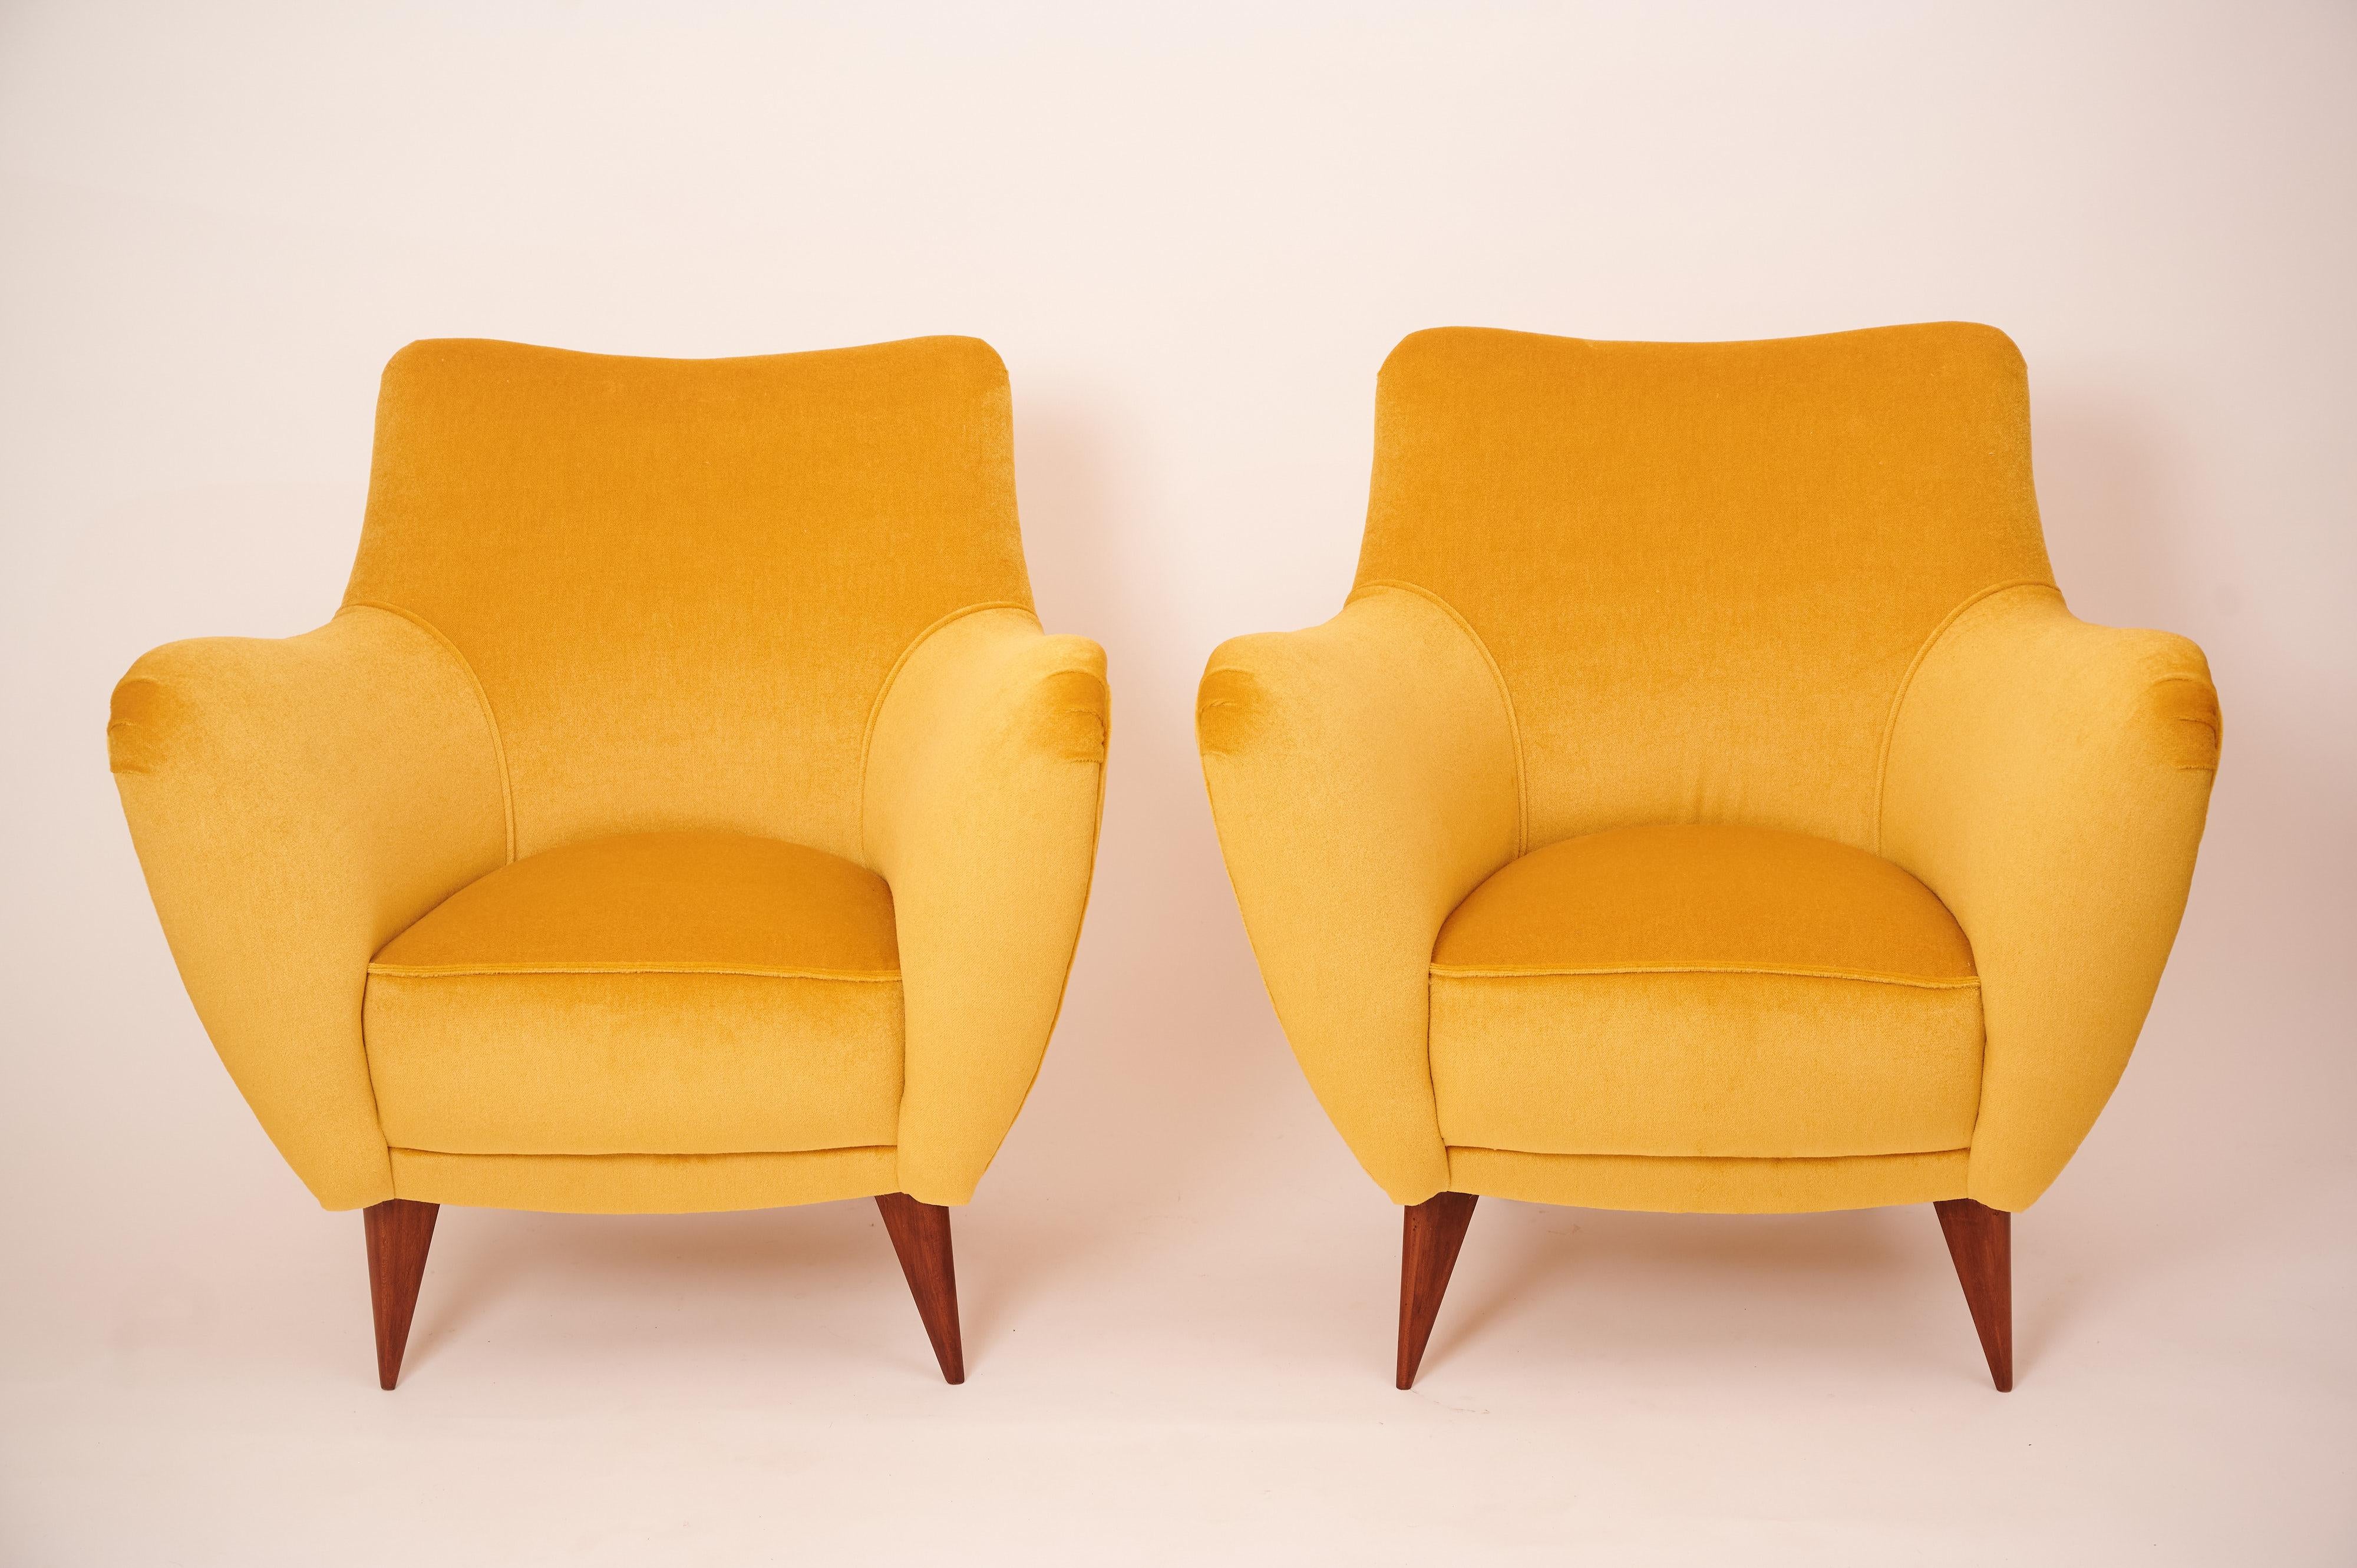 From 1950s Italy...

Gorgeous mid century 'Perla' chairs by Guglielmo Veronesi, for ISA Bergamo

 Restored and reupholstered in a yellow gold, silk and mohair velvet. 

Stylish original chairs.

Similar to chairs by Gio Ponti

